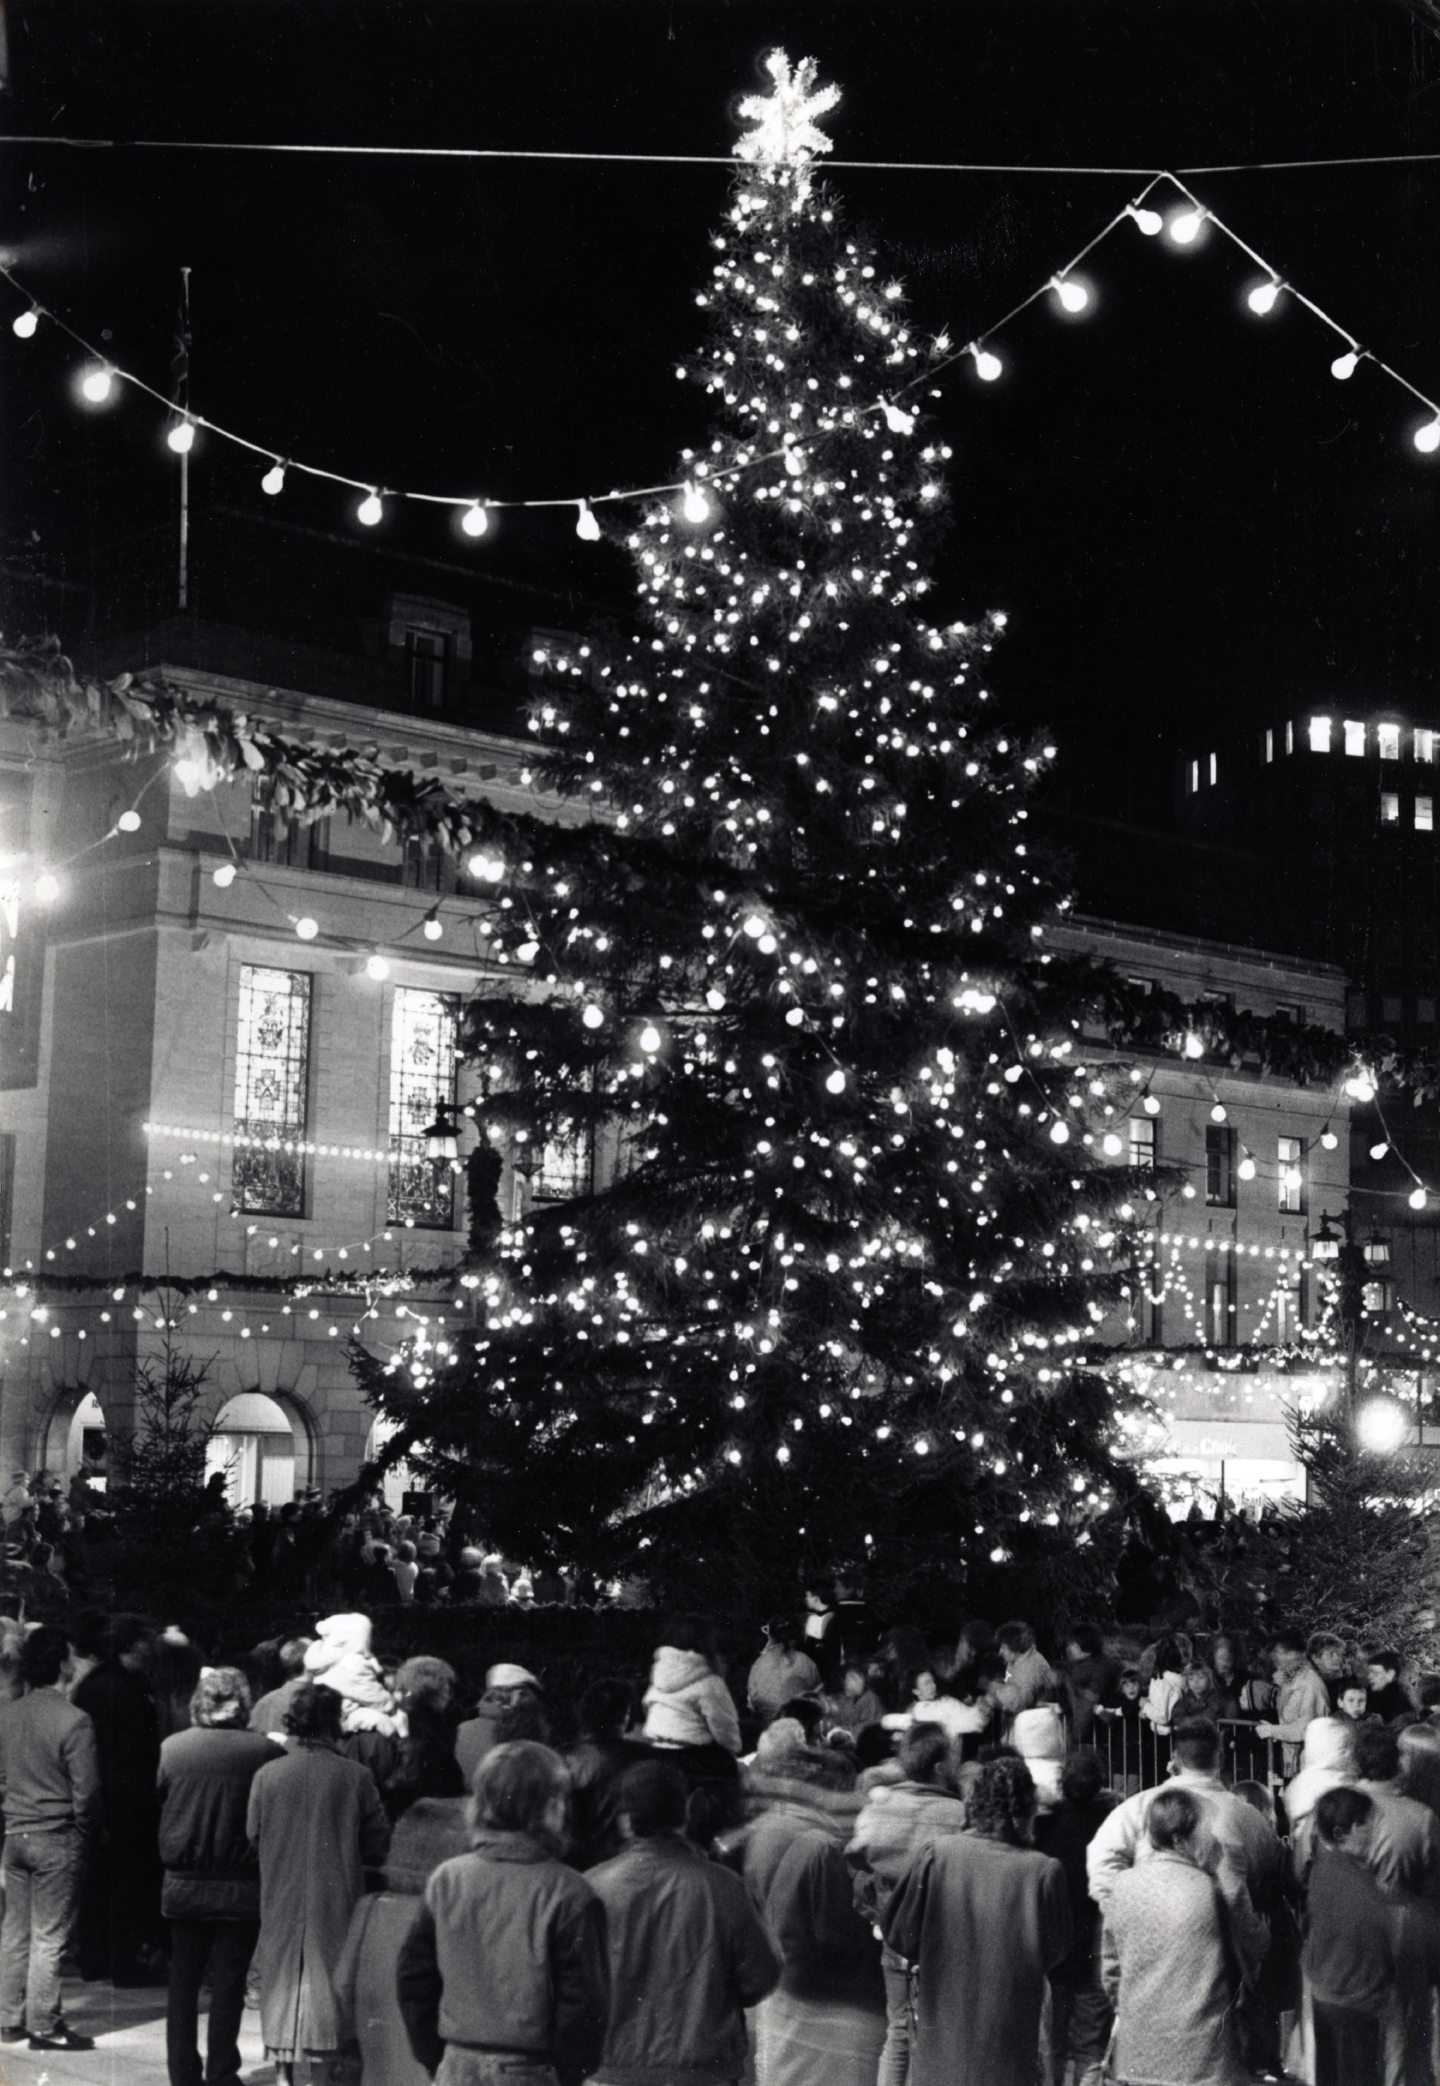 The Christmas tree ights switch on in Dundee in 1989.